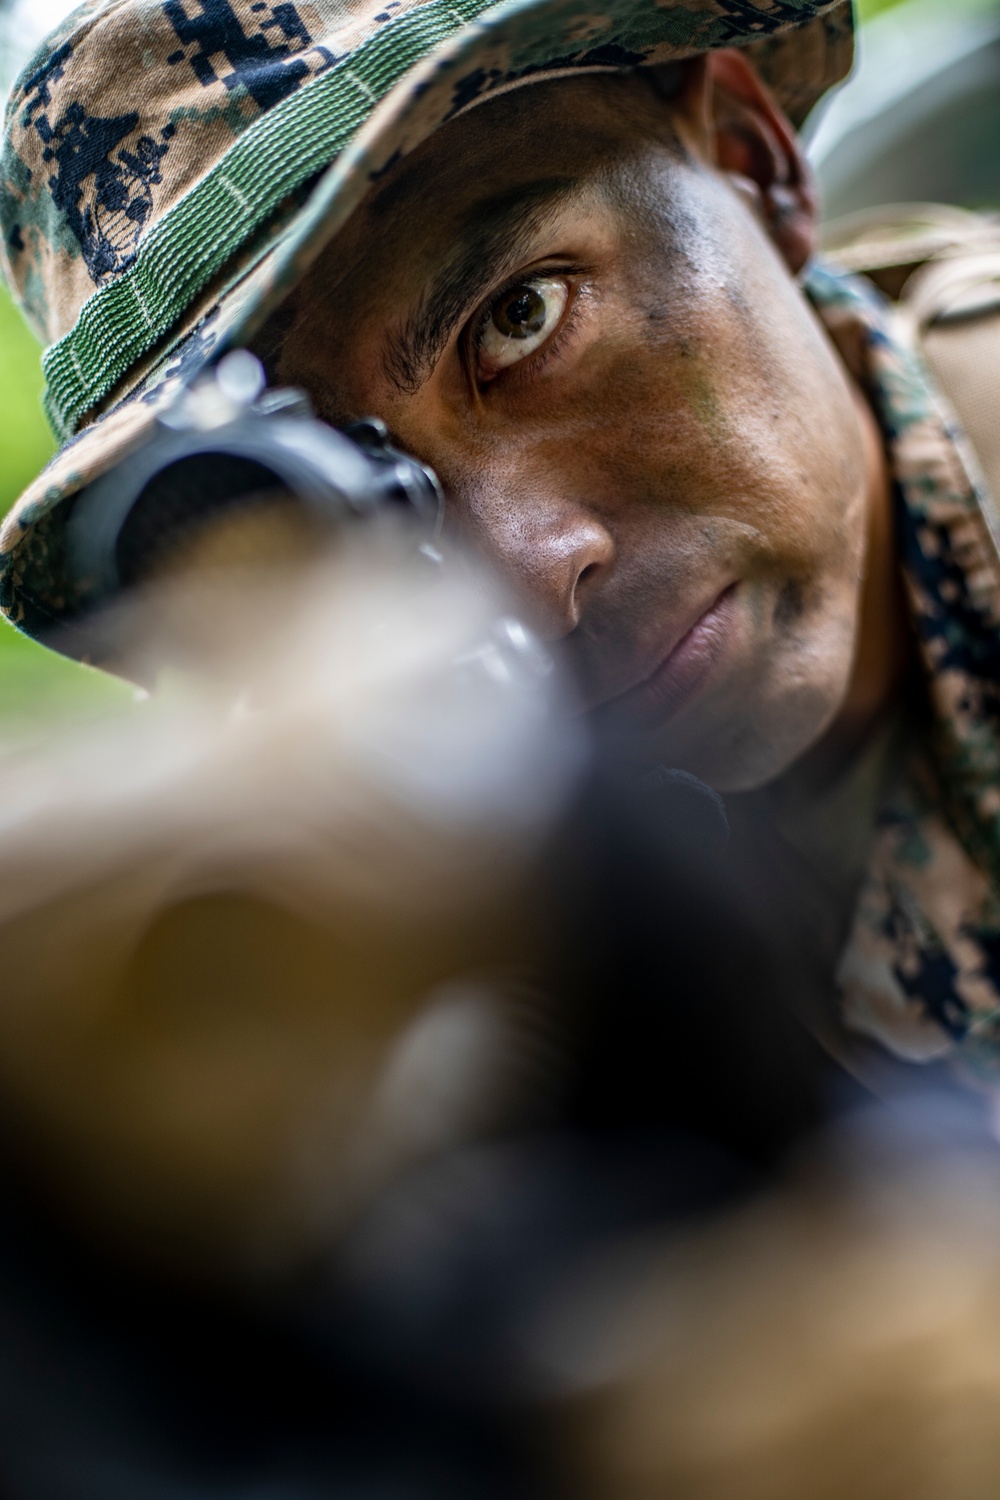 Task force Marines deploying to Latin America increase unit readiness with patrolling procedures